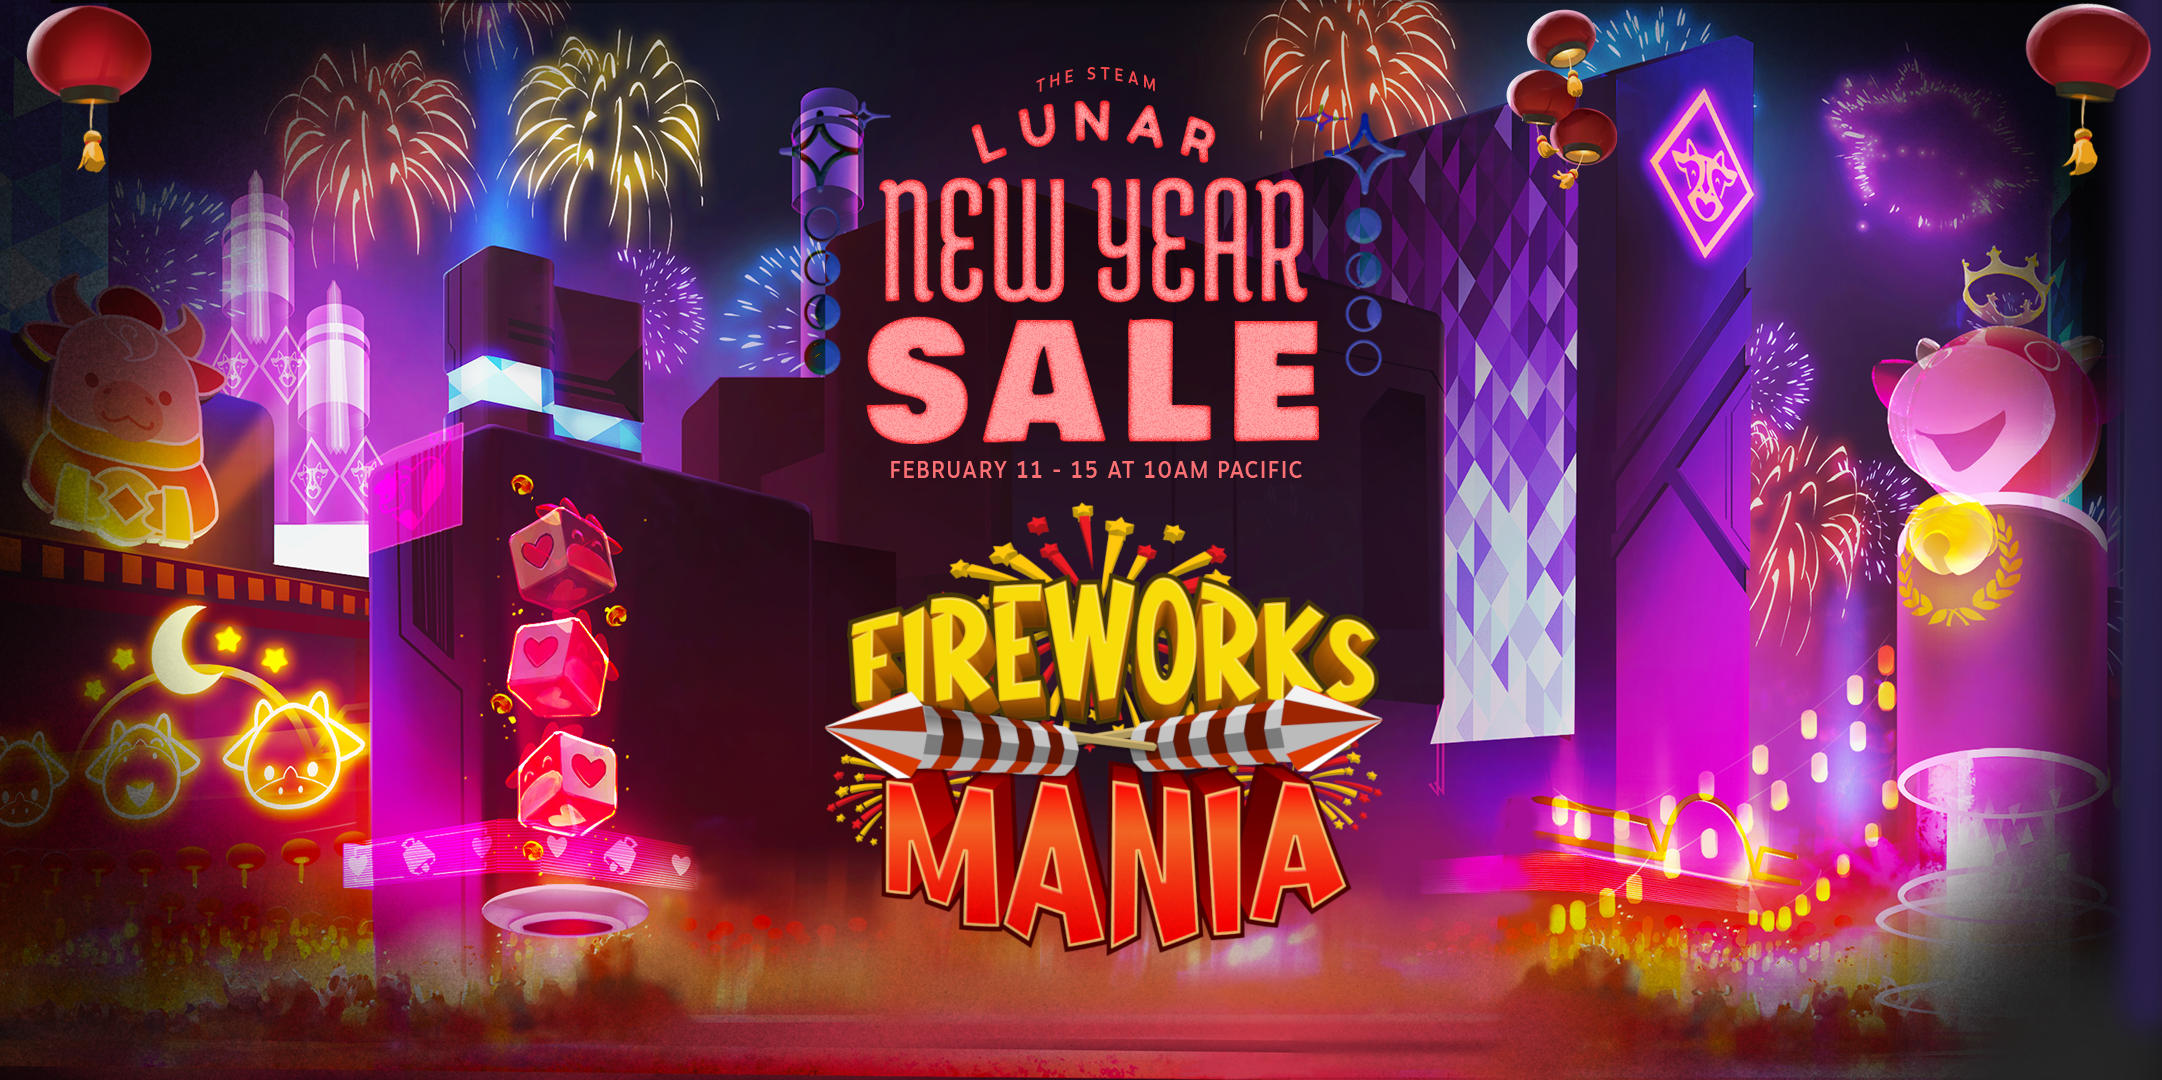 Chinese New Year V2021 2 1 Fireworks Mania Update For 11 February 2021 Steamdb